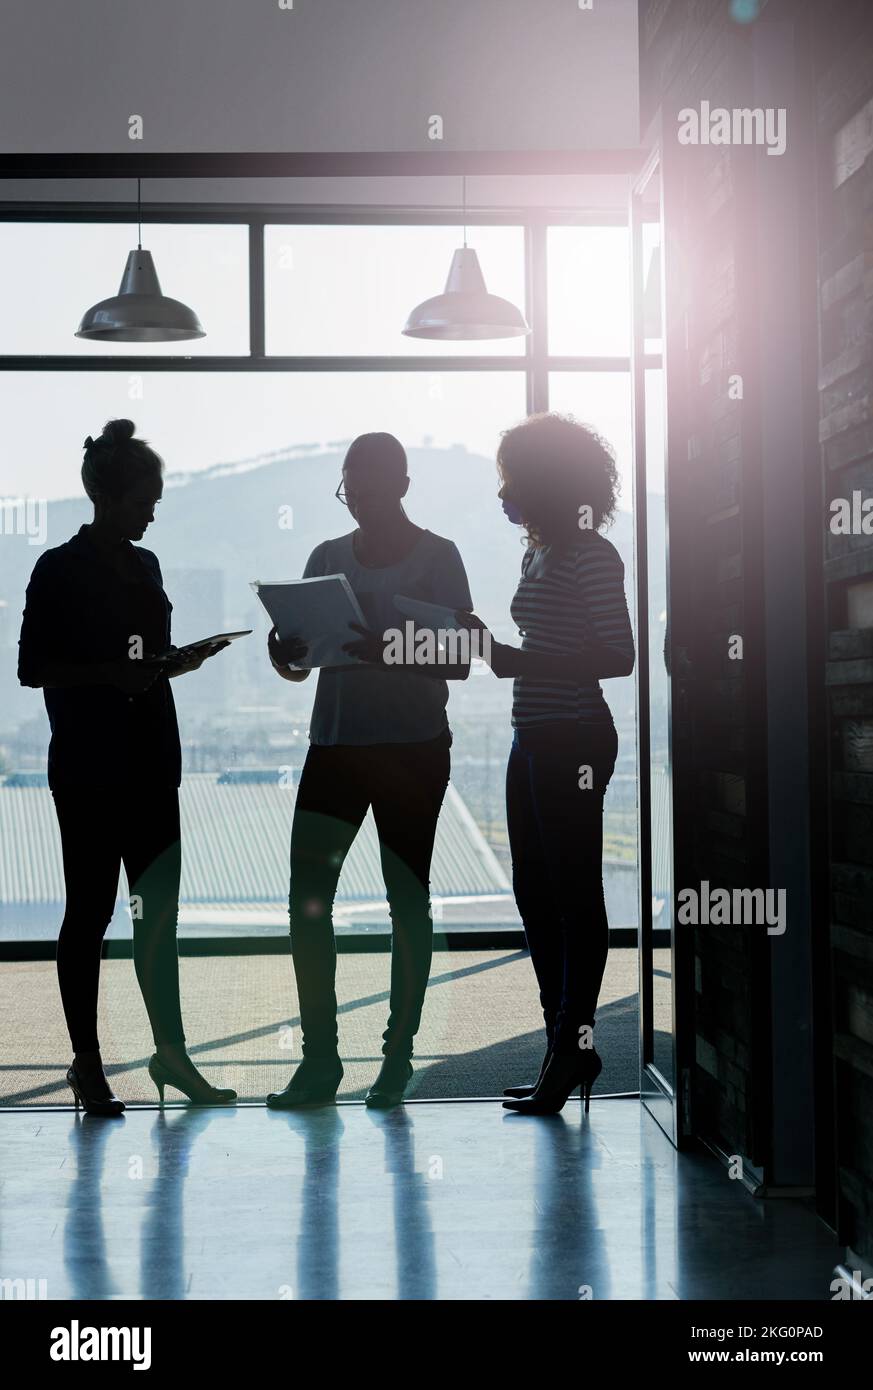 Success takes teamwork. Silhouette shot of female coworkers talking while standing in front of a window in an office. Stock Photo